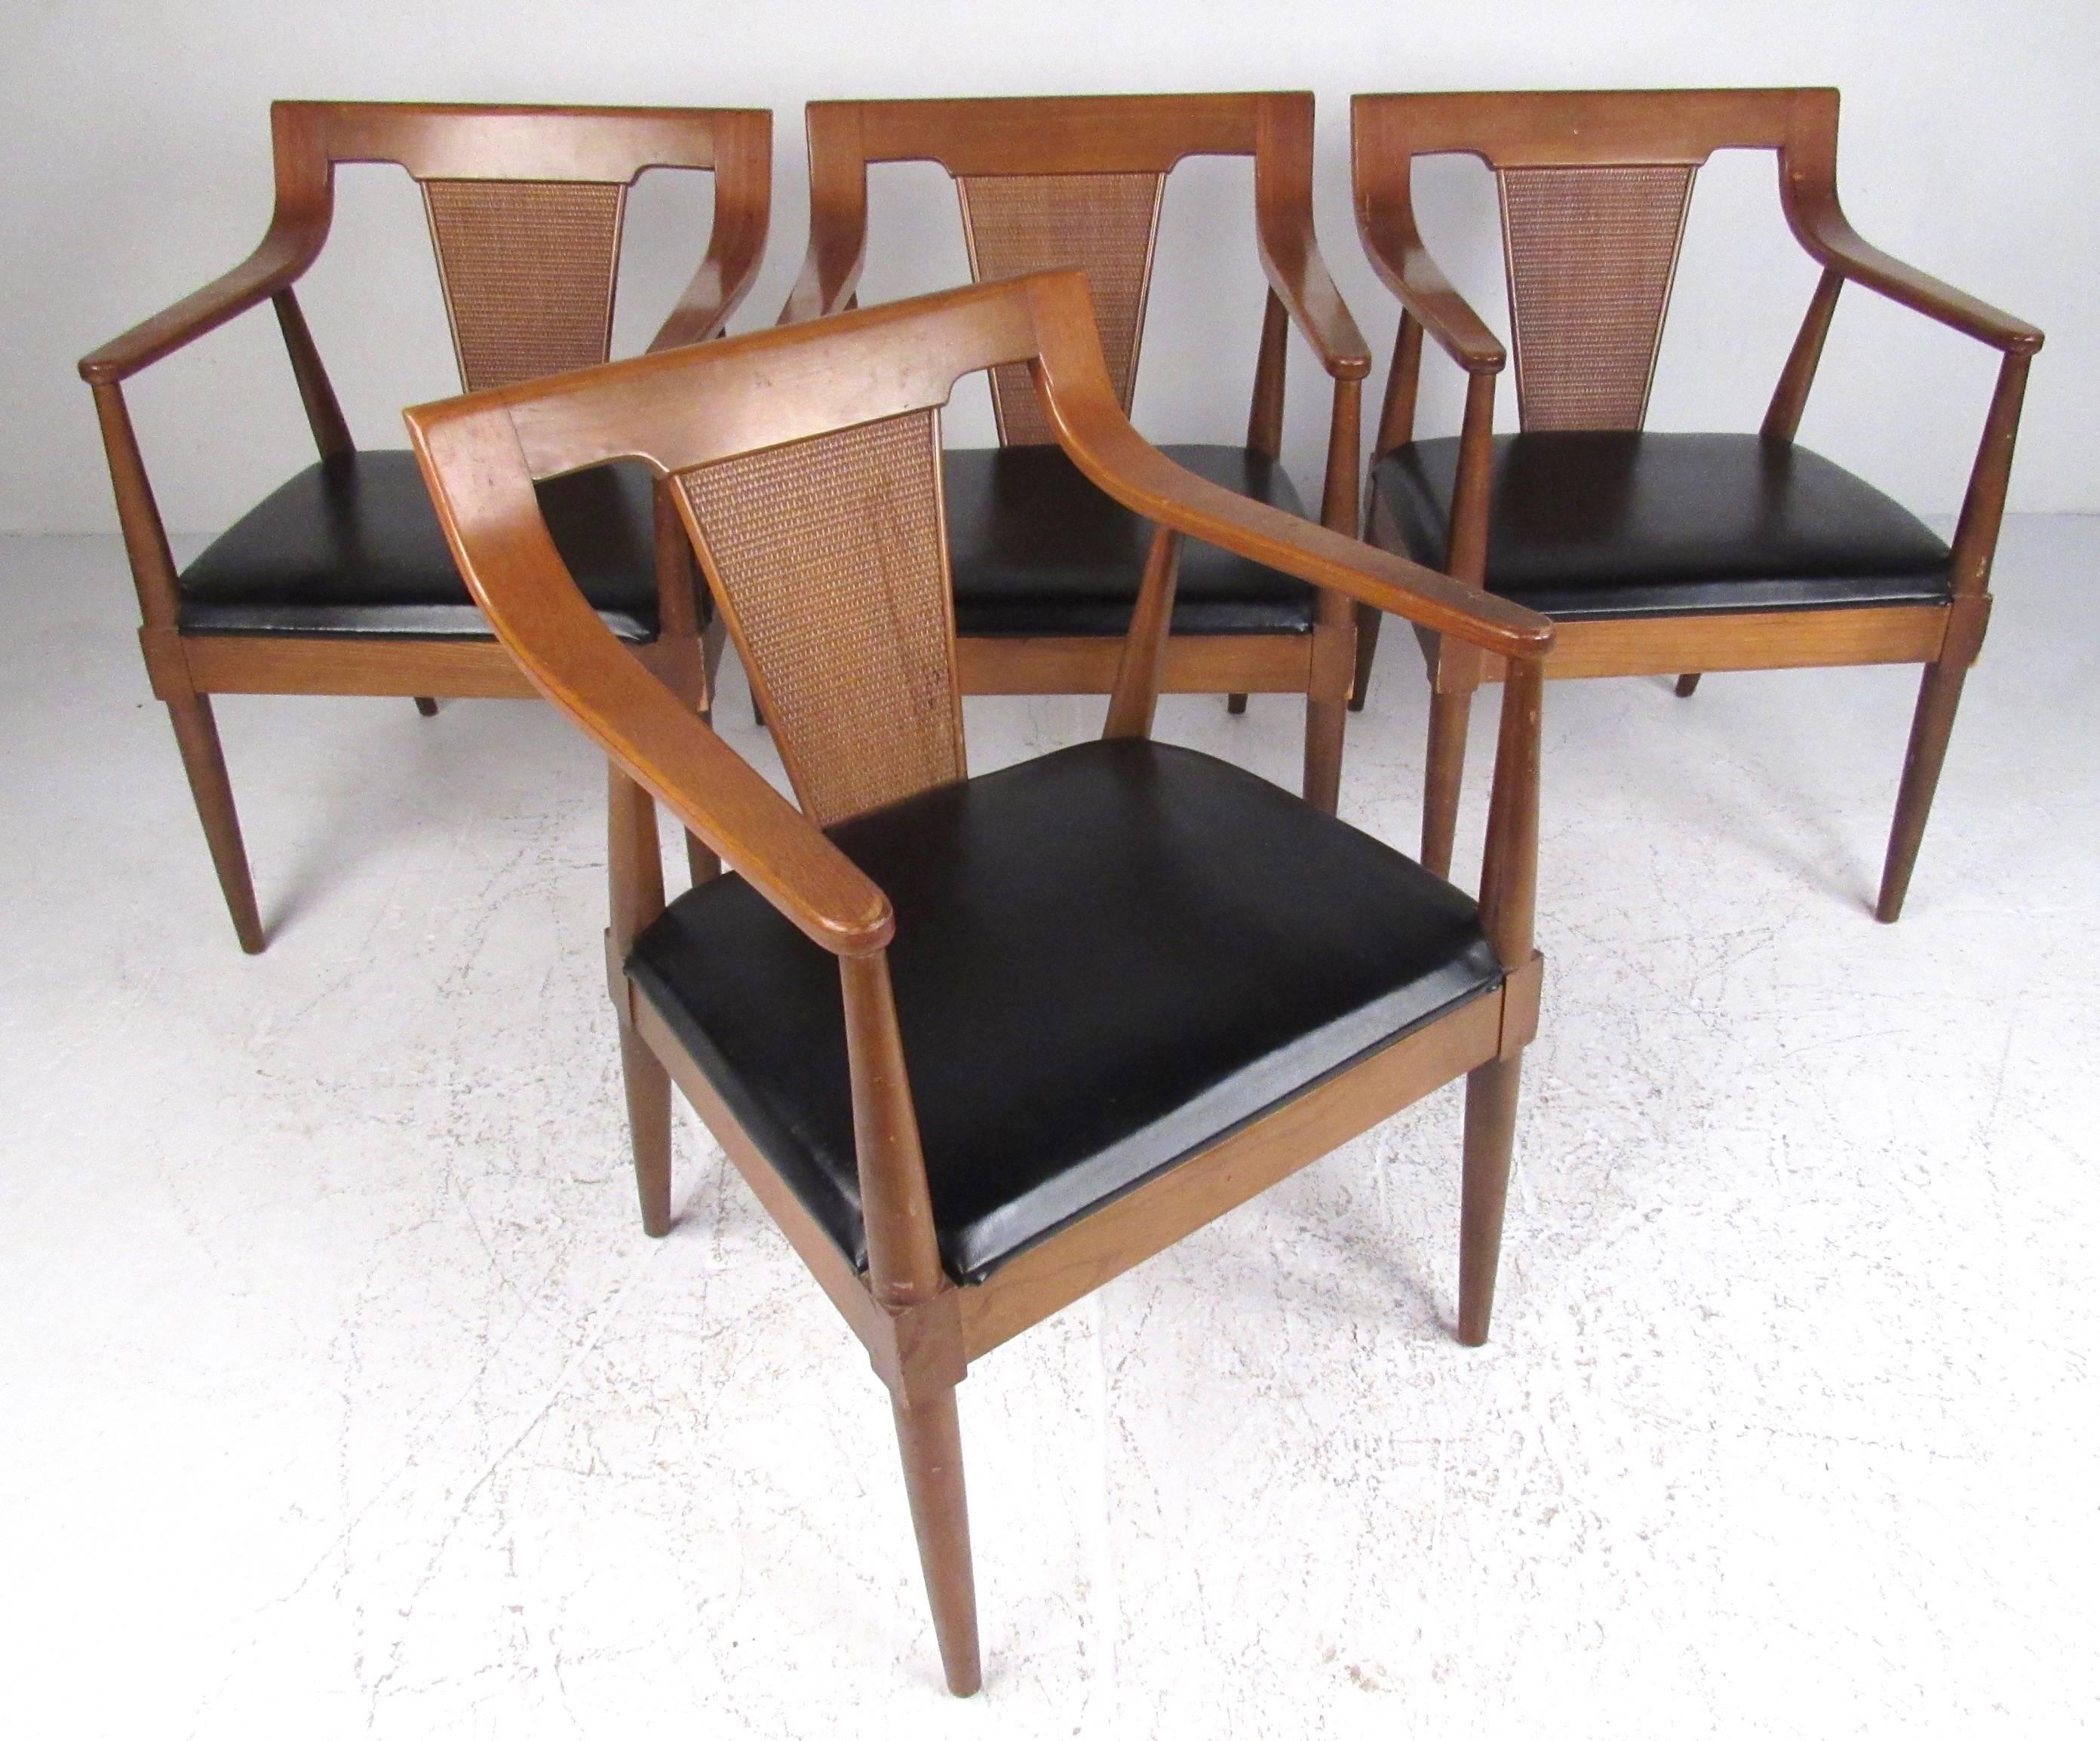 This unique set of four armchairs feature sculpted American walnut construction, spacious vinyl seats, and stylish Mid-Century Modern design. Sturdy set of arm chairs by Basic Witz make the perfect addition to any dining room or office. Please